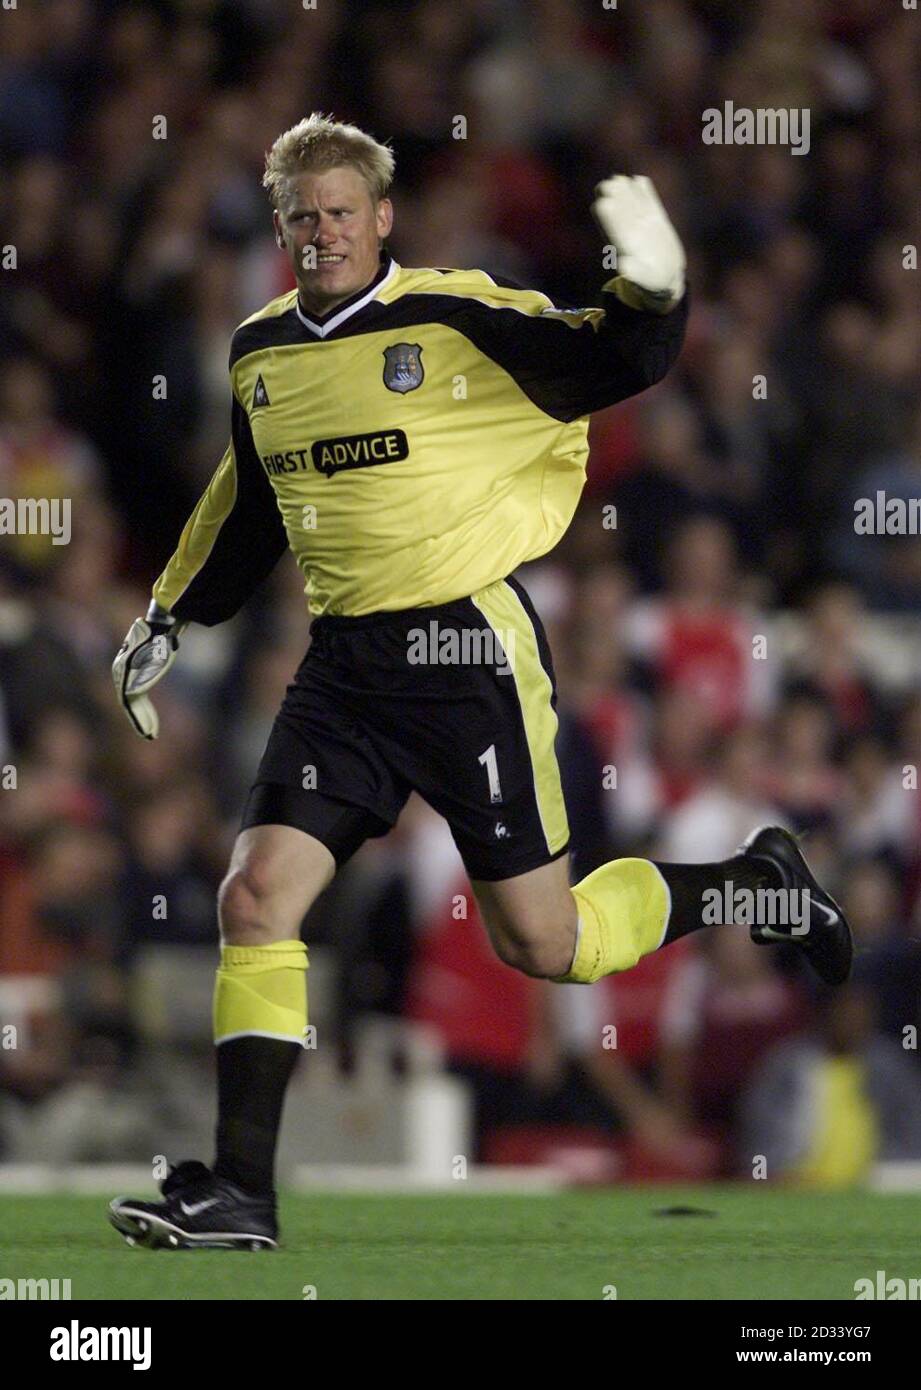 Having failed to make an impact on a last minute Man City's corner goalkeeper  Peter Schimeichel runs back to face an Arsenal attack, during tonight's Barclaycard Premiership match at Highbury London. THIS PICTURE CAN ONLY BE USED WITHIN THE CONTEXT OF AN EDITORIAL FEATURE. NO WEBSITE/INTERNET USE UNLESS SITE IS REGISTERED WITH FOOTBALL ASSOCIATION PREMIER LEAGUE. Stock Photo